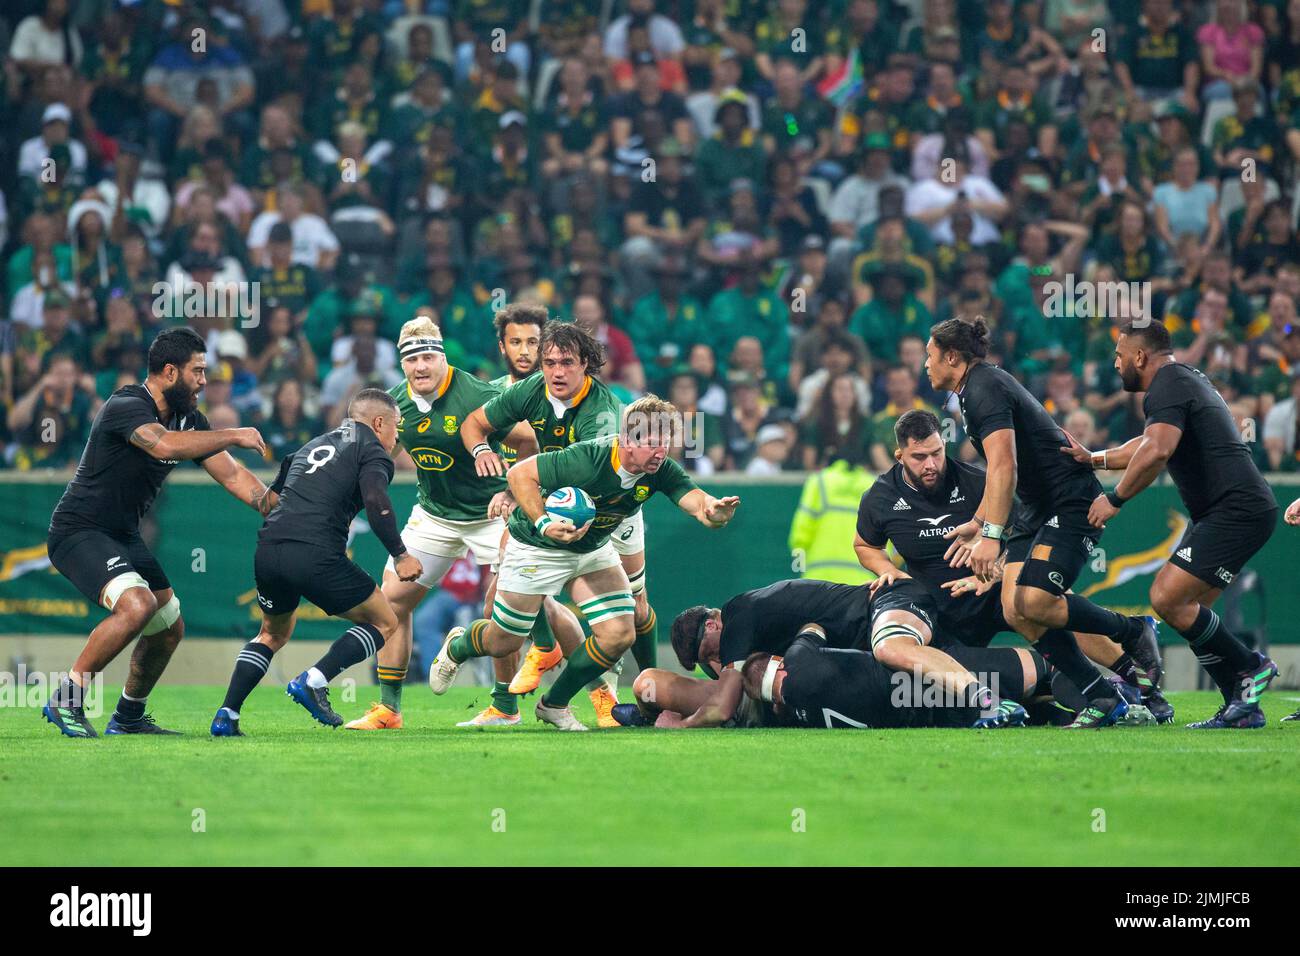 Mbombela, Nelspruit, South Africa. 6th August, 2022. Kwagga Smith breaking away with the ball during the Springbok test against the All Blacks at the Castle Lager Rugby Championship in Mbombela, Nelspruit Credit: AfriPics.com/Alamy Live News Stock Photo